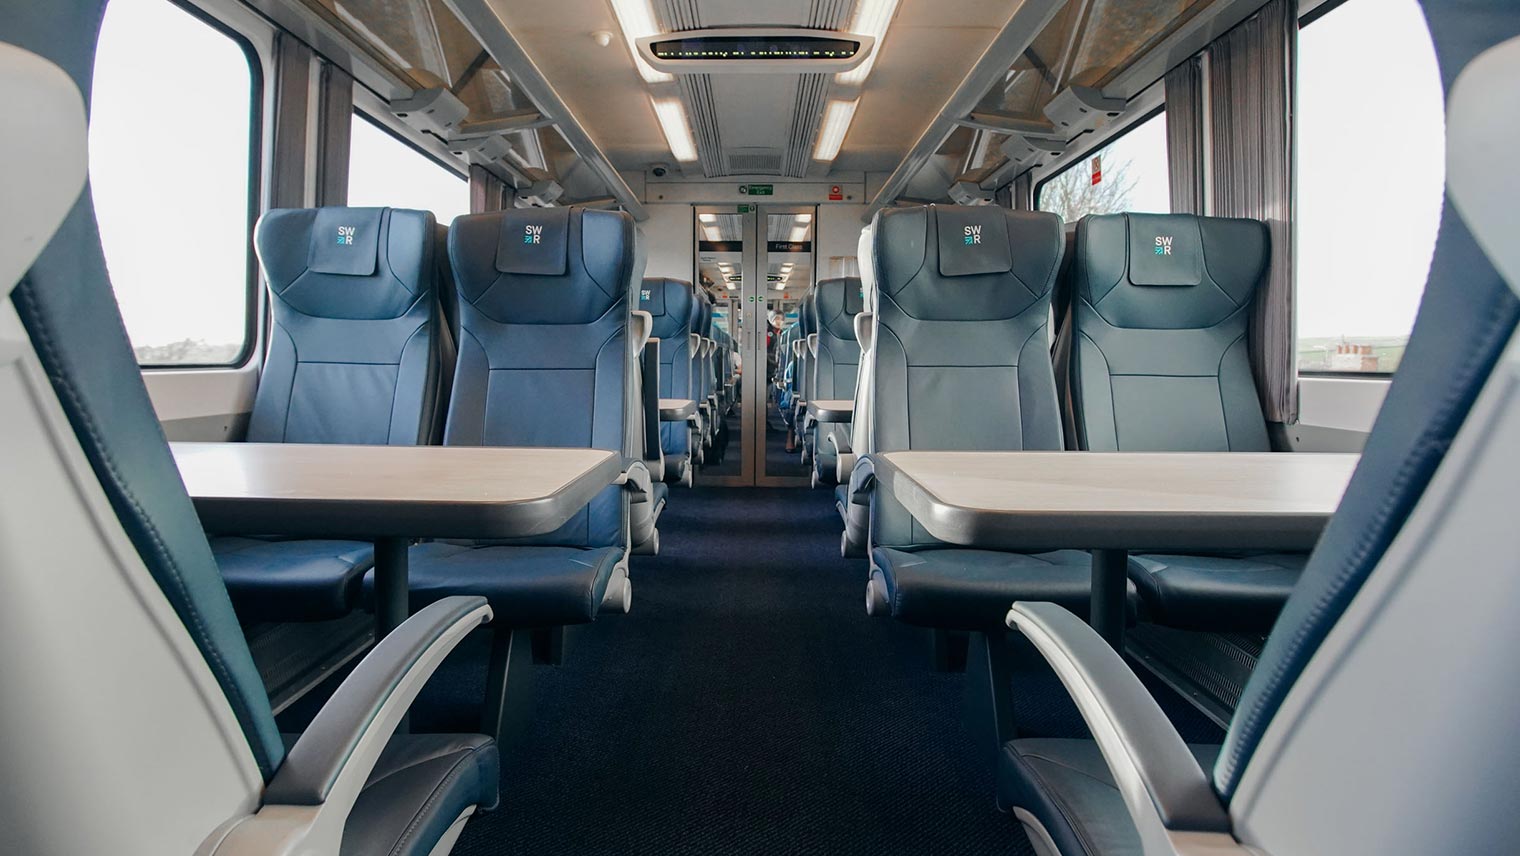 why travel first class on a train